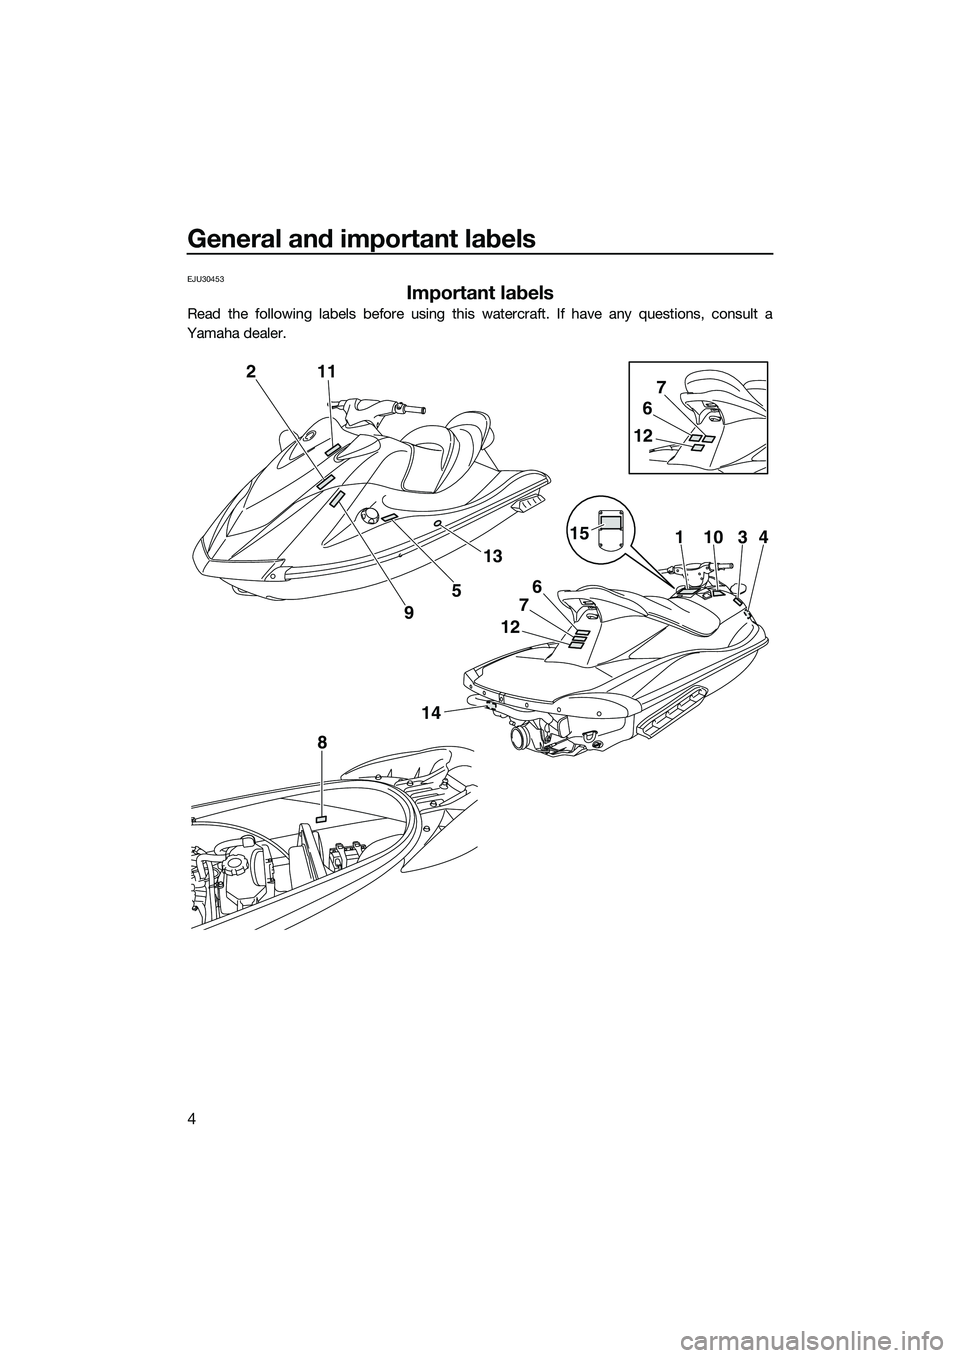 YAMAHA VX CRUISER 2014  Owners Manual General and important labels
4
EJU30453
Important labels
Read the following labels before using this watercraft. If have any questions, consult a
Yamaha dealer.
2
14
8
12
6
7
15
6
7
12
11034
11
9
5
13